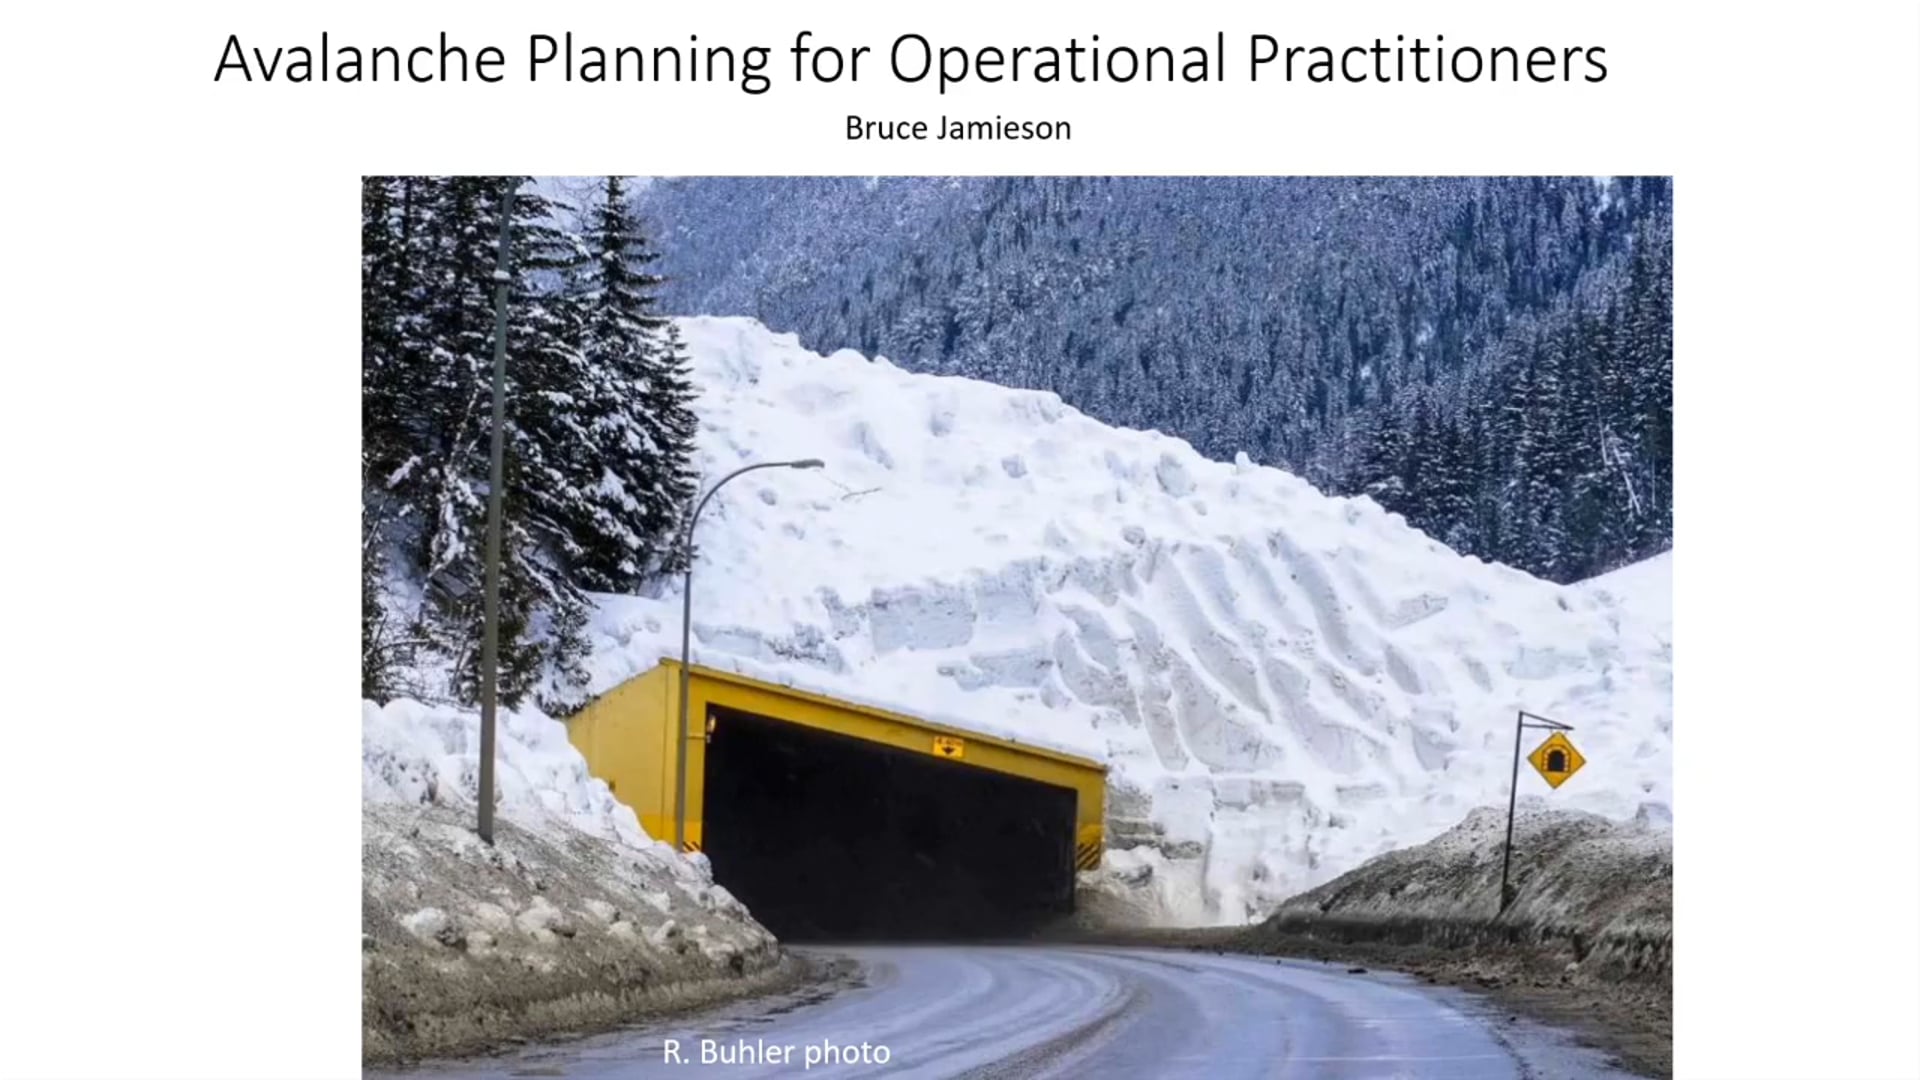 Avalanche planning for operational practitioners